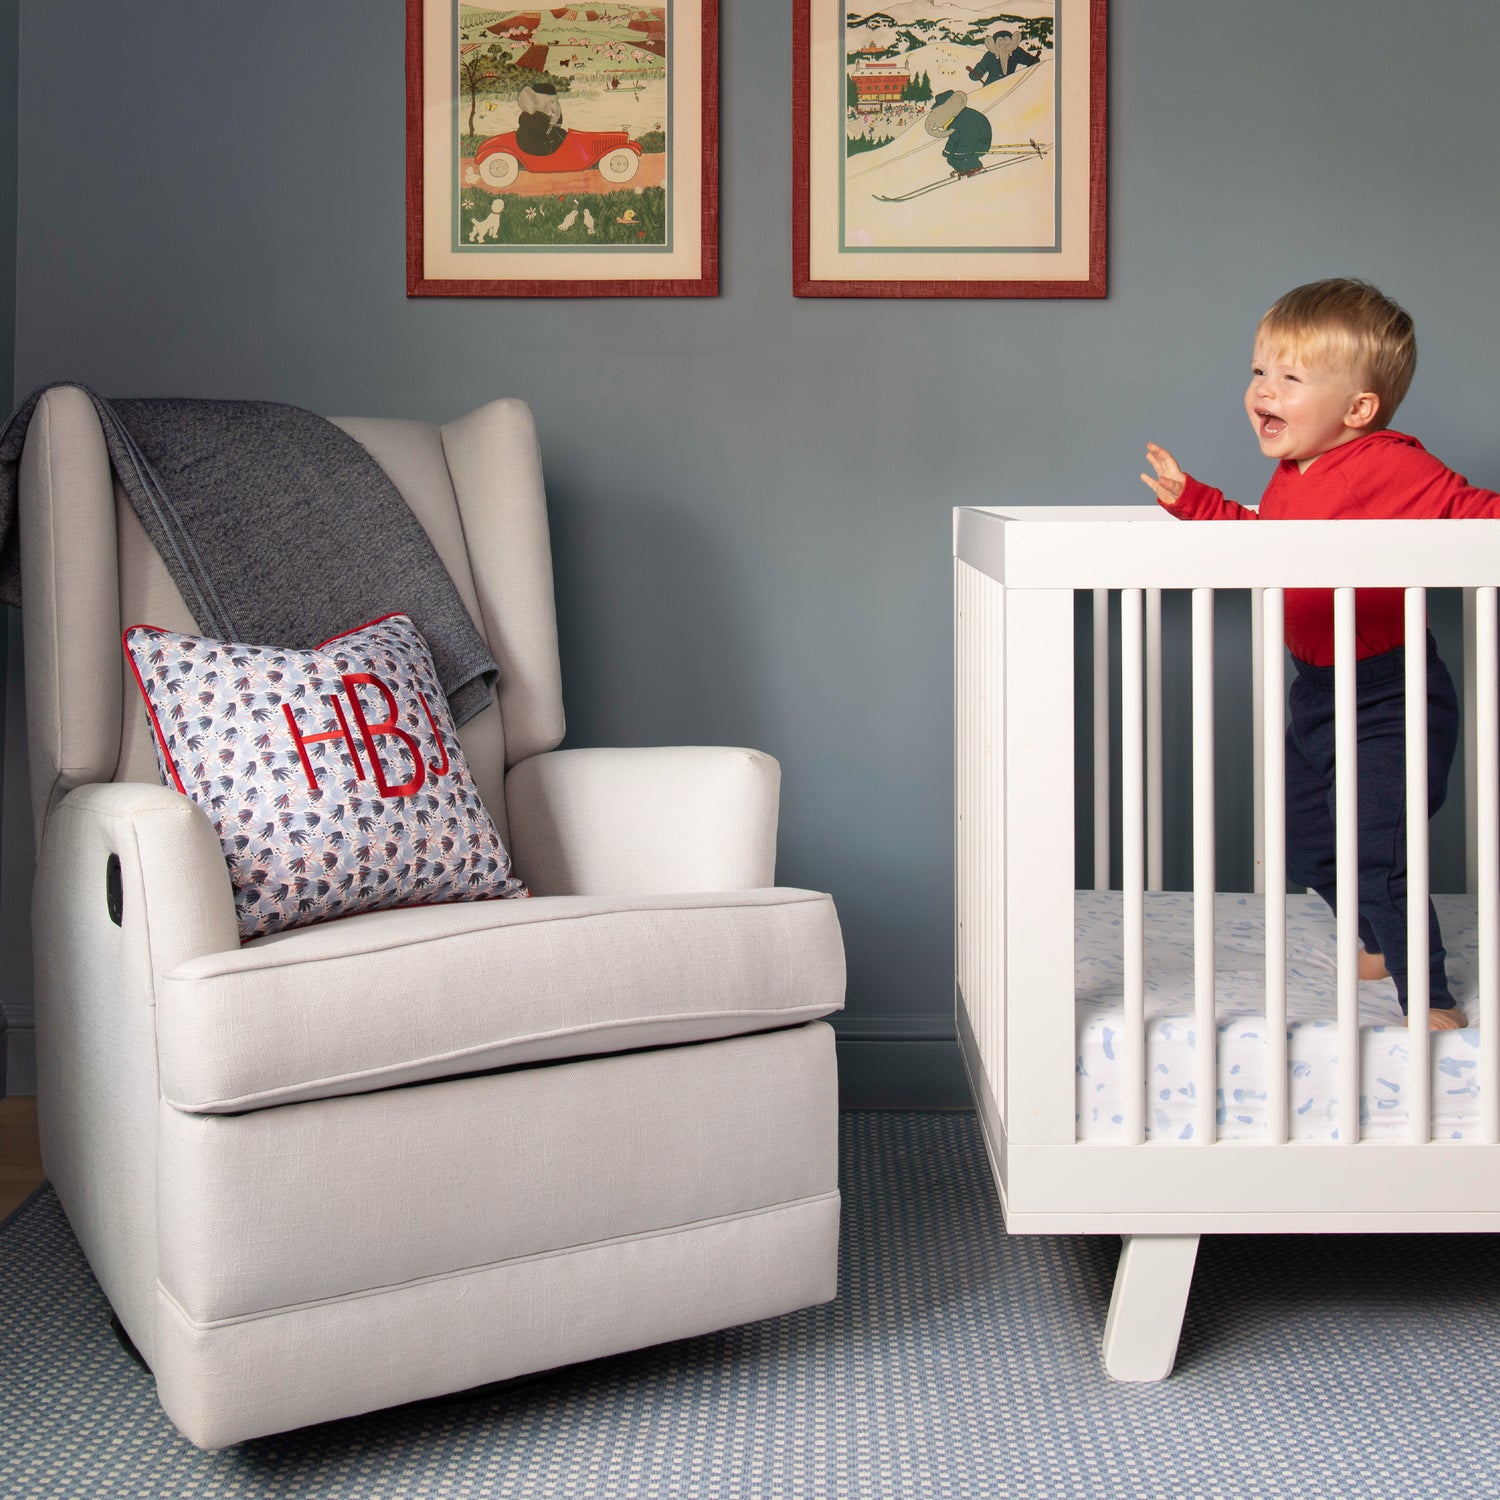 Nursery Room styled with red and blue printed monogrammed pillow on white reclinable sofa chair next to white crib with joyous blonde baby wearing a red long sleeve and navy pants next to two framed artworks